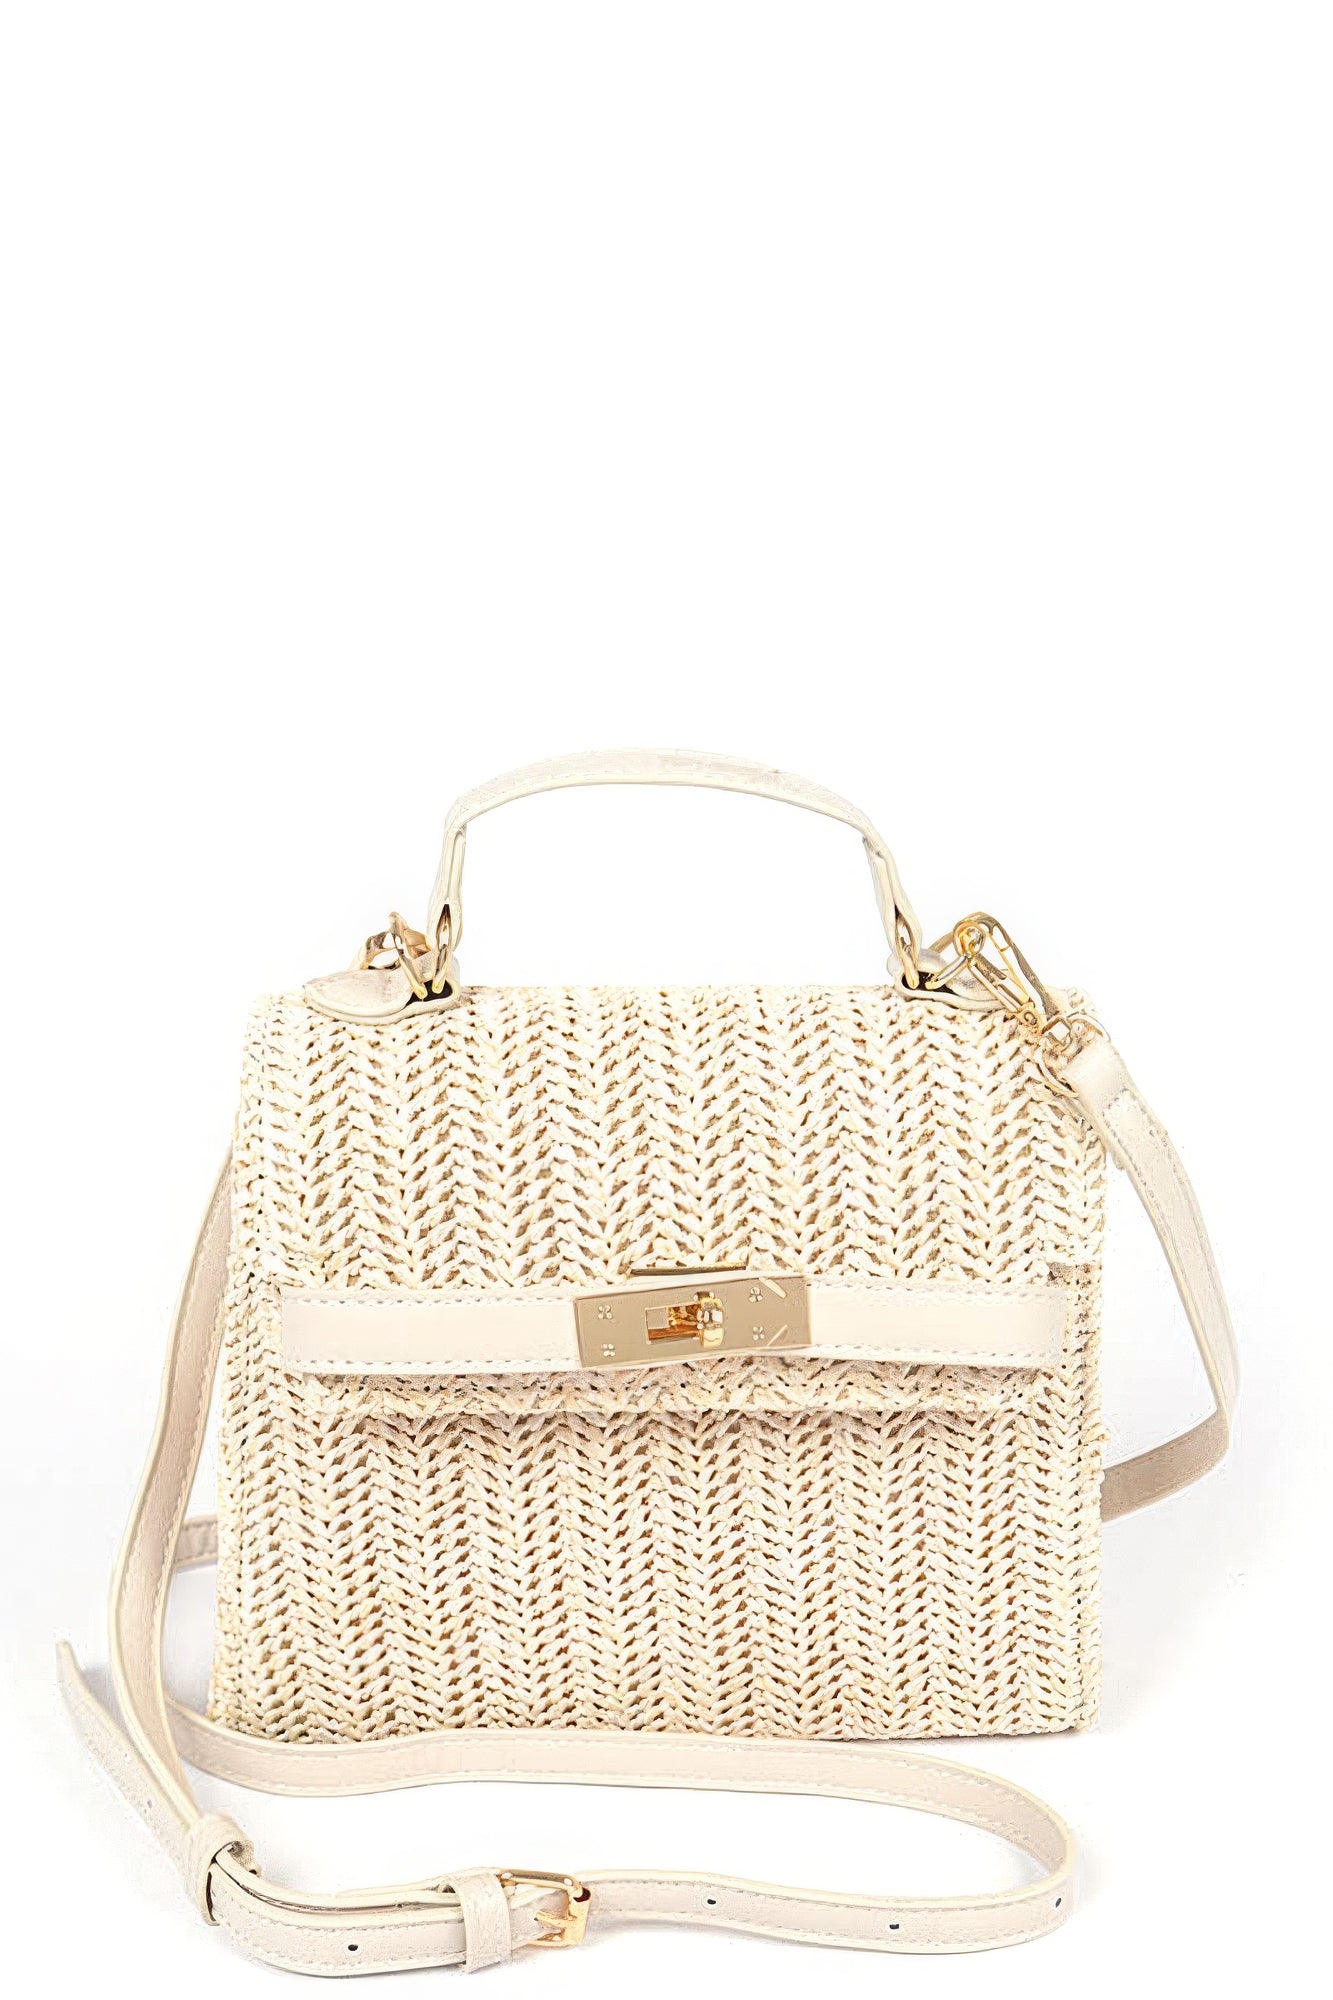 THE HANNAH Faux Straw Top Handle Clutch